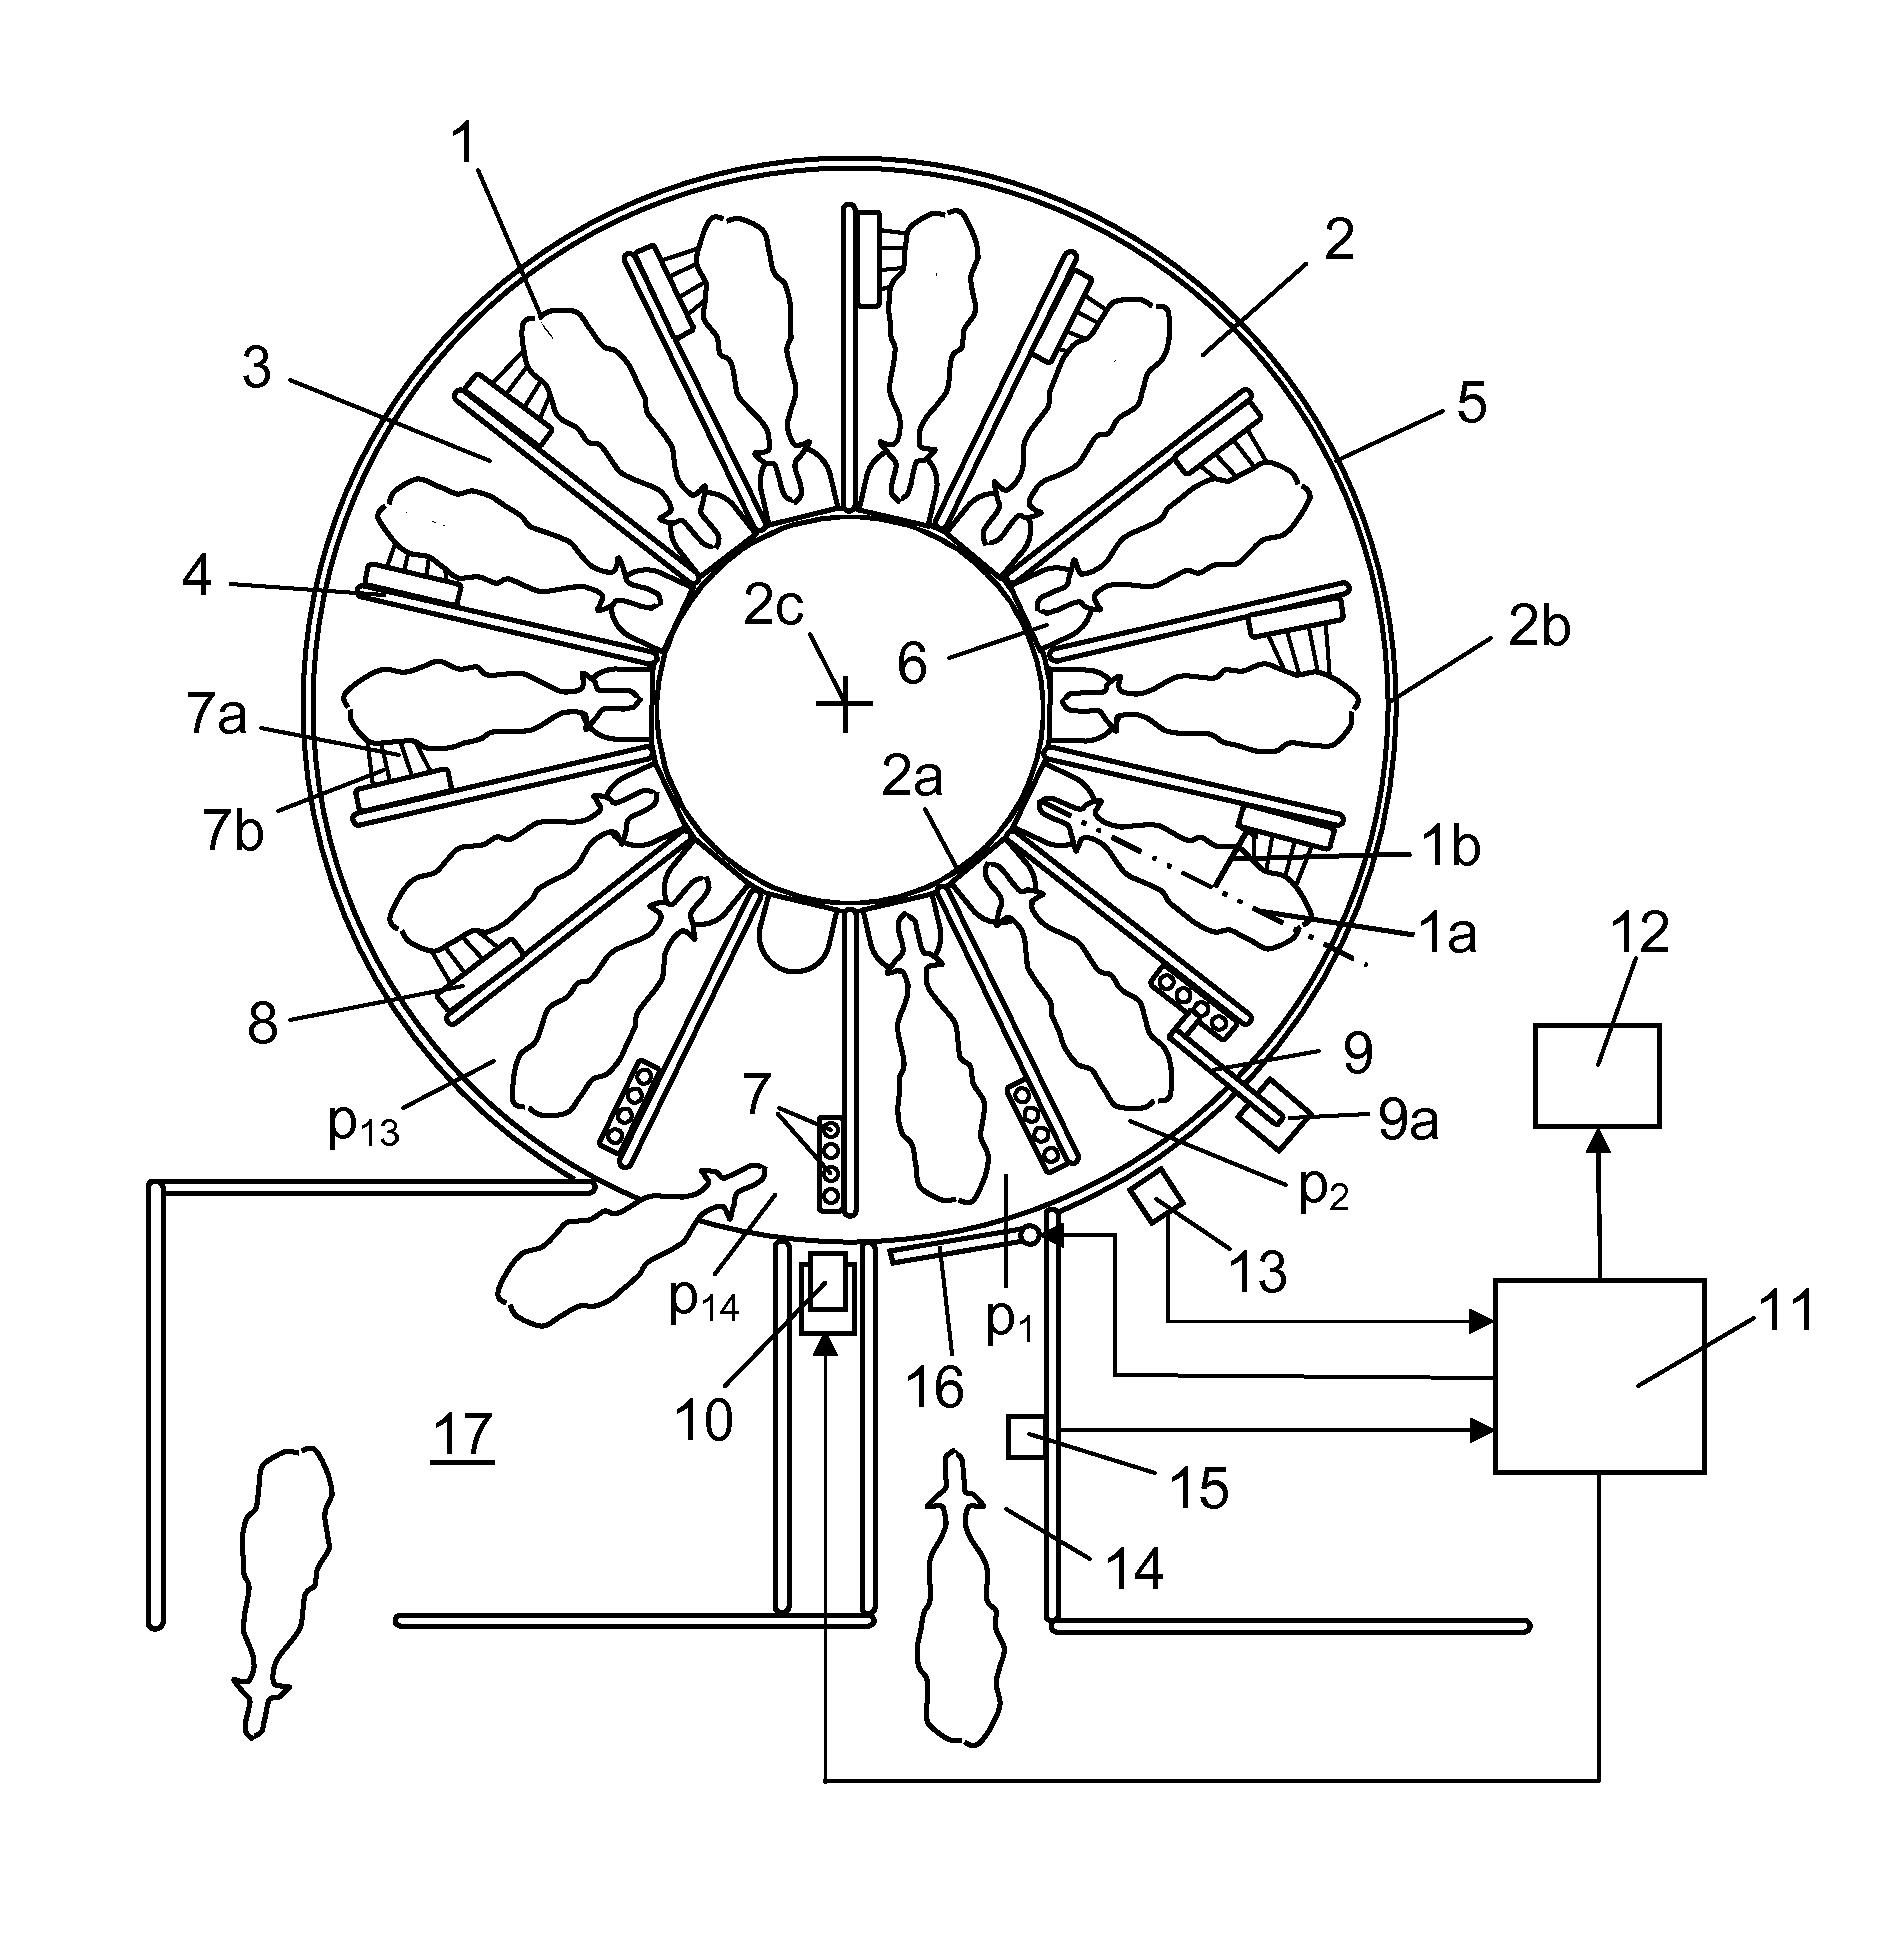 Arrangement for automatically cleaning teat cups of a rotary milking platform